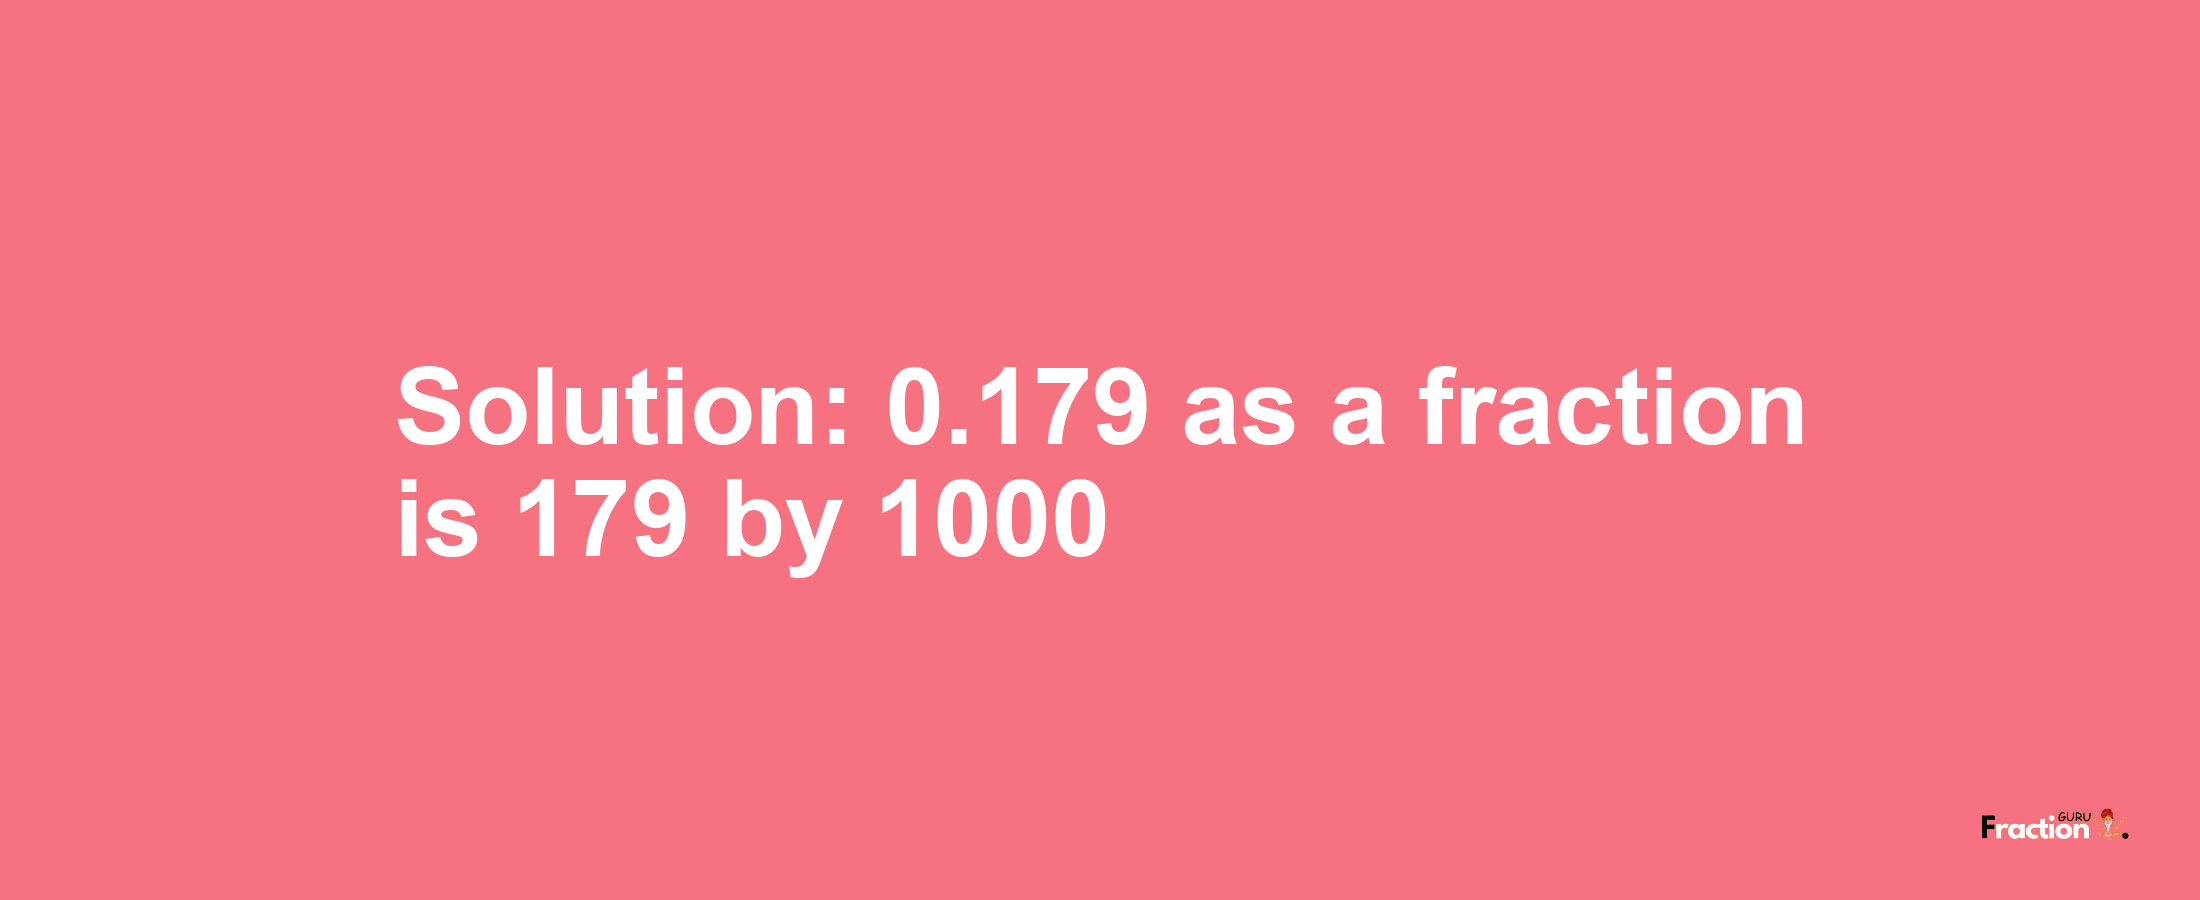 Solution:0.179 as a fraction is 179/1000